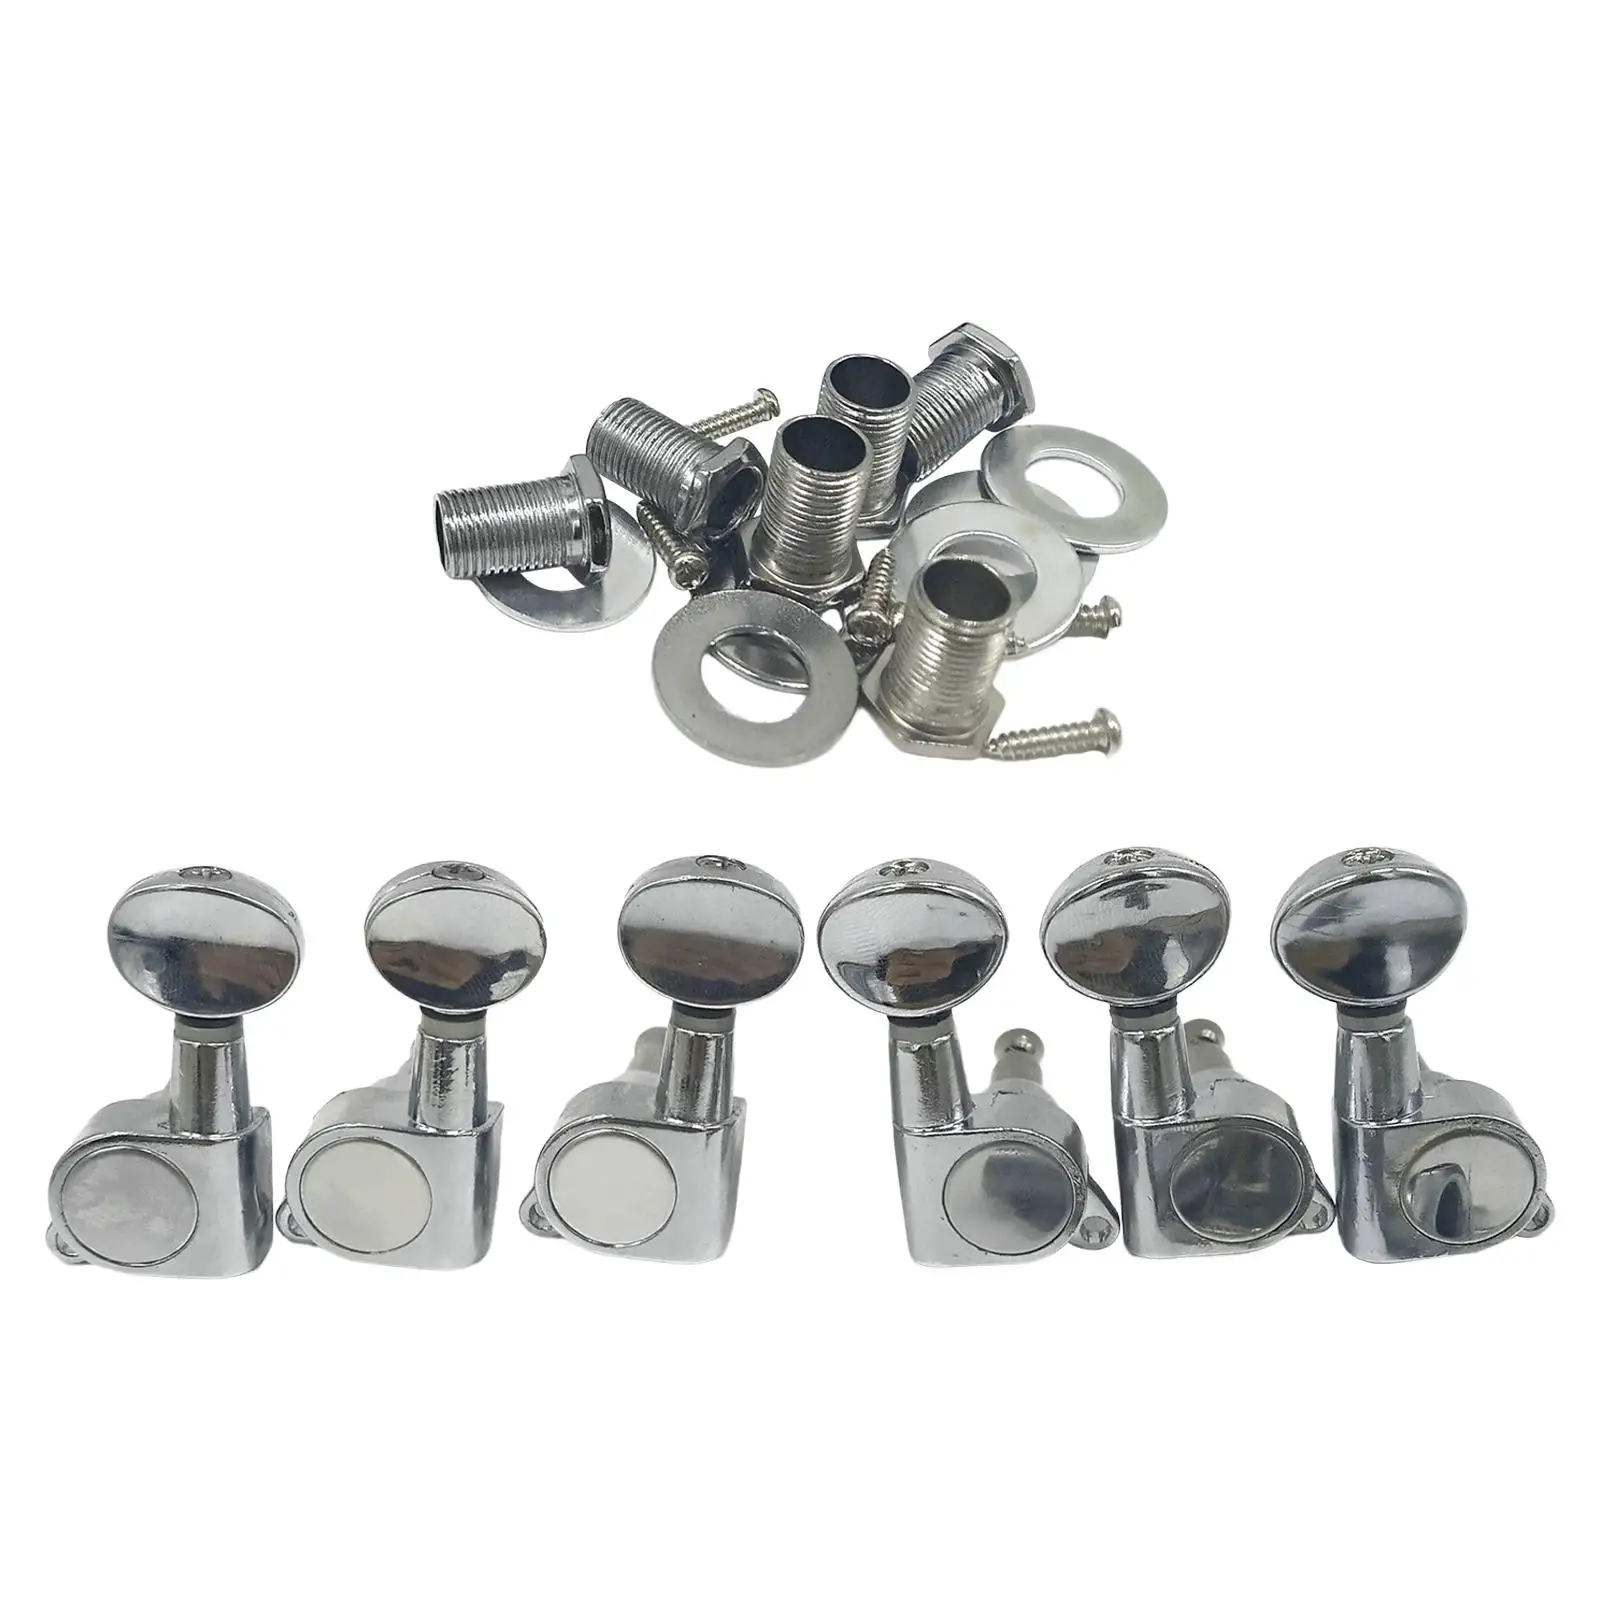 6 Pieces Guitar Tuning Peg Tuner with Nuts Gaskets Machine Head Key Peg Knobs Tuners for Acoustic Guitar Replacement Parts